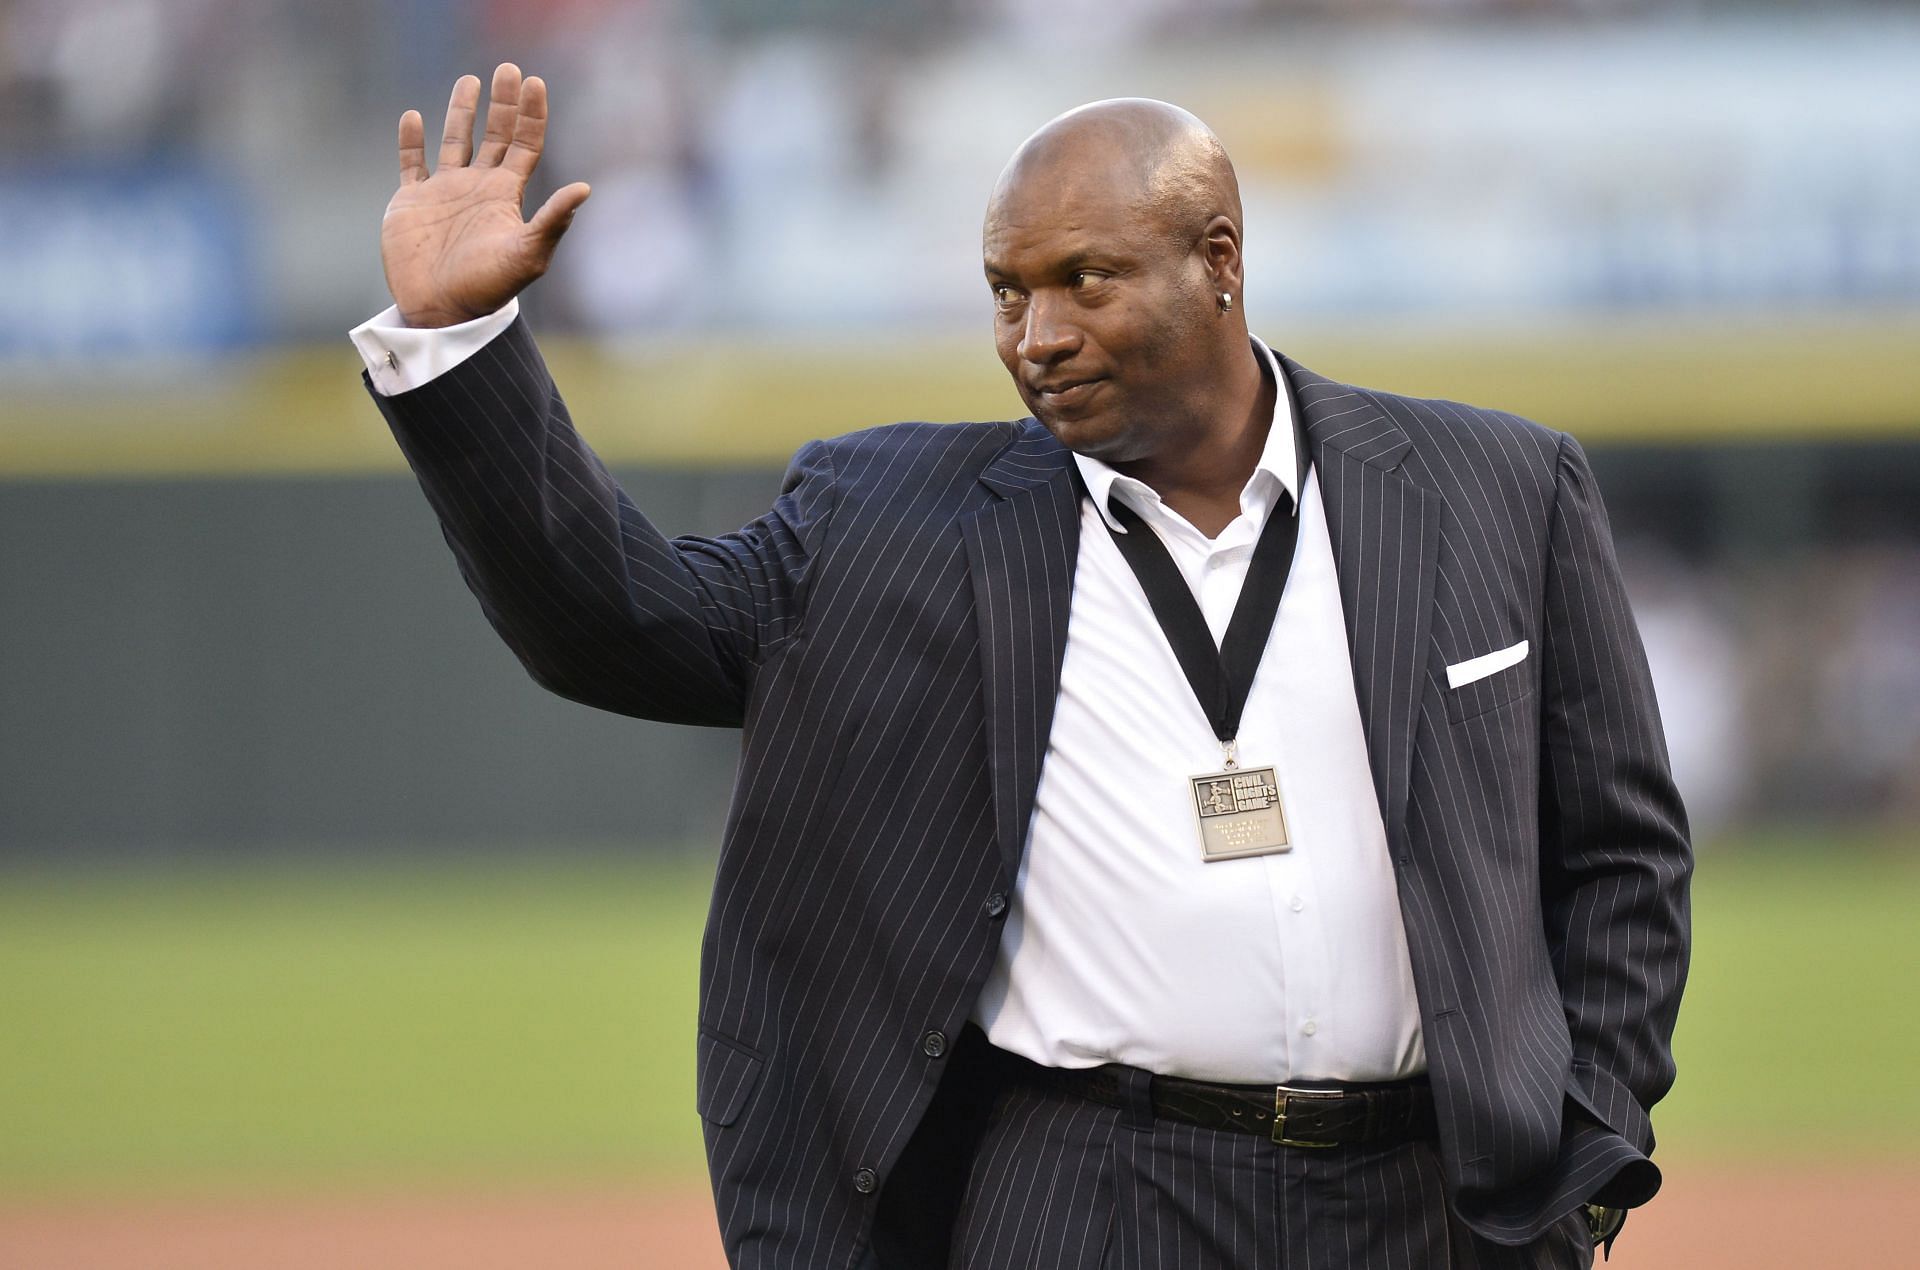 Former Chicago White Sox and Kansas City Royals player and Heisman Trophy winner Bo Jackson waves to the crowd